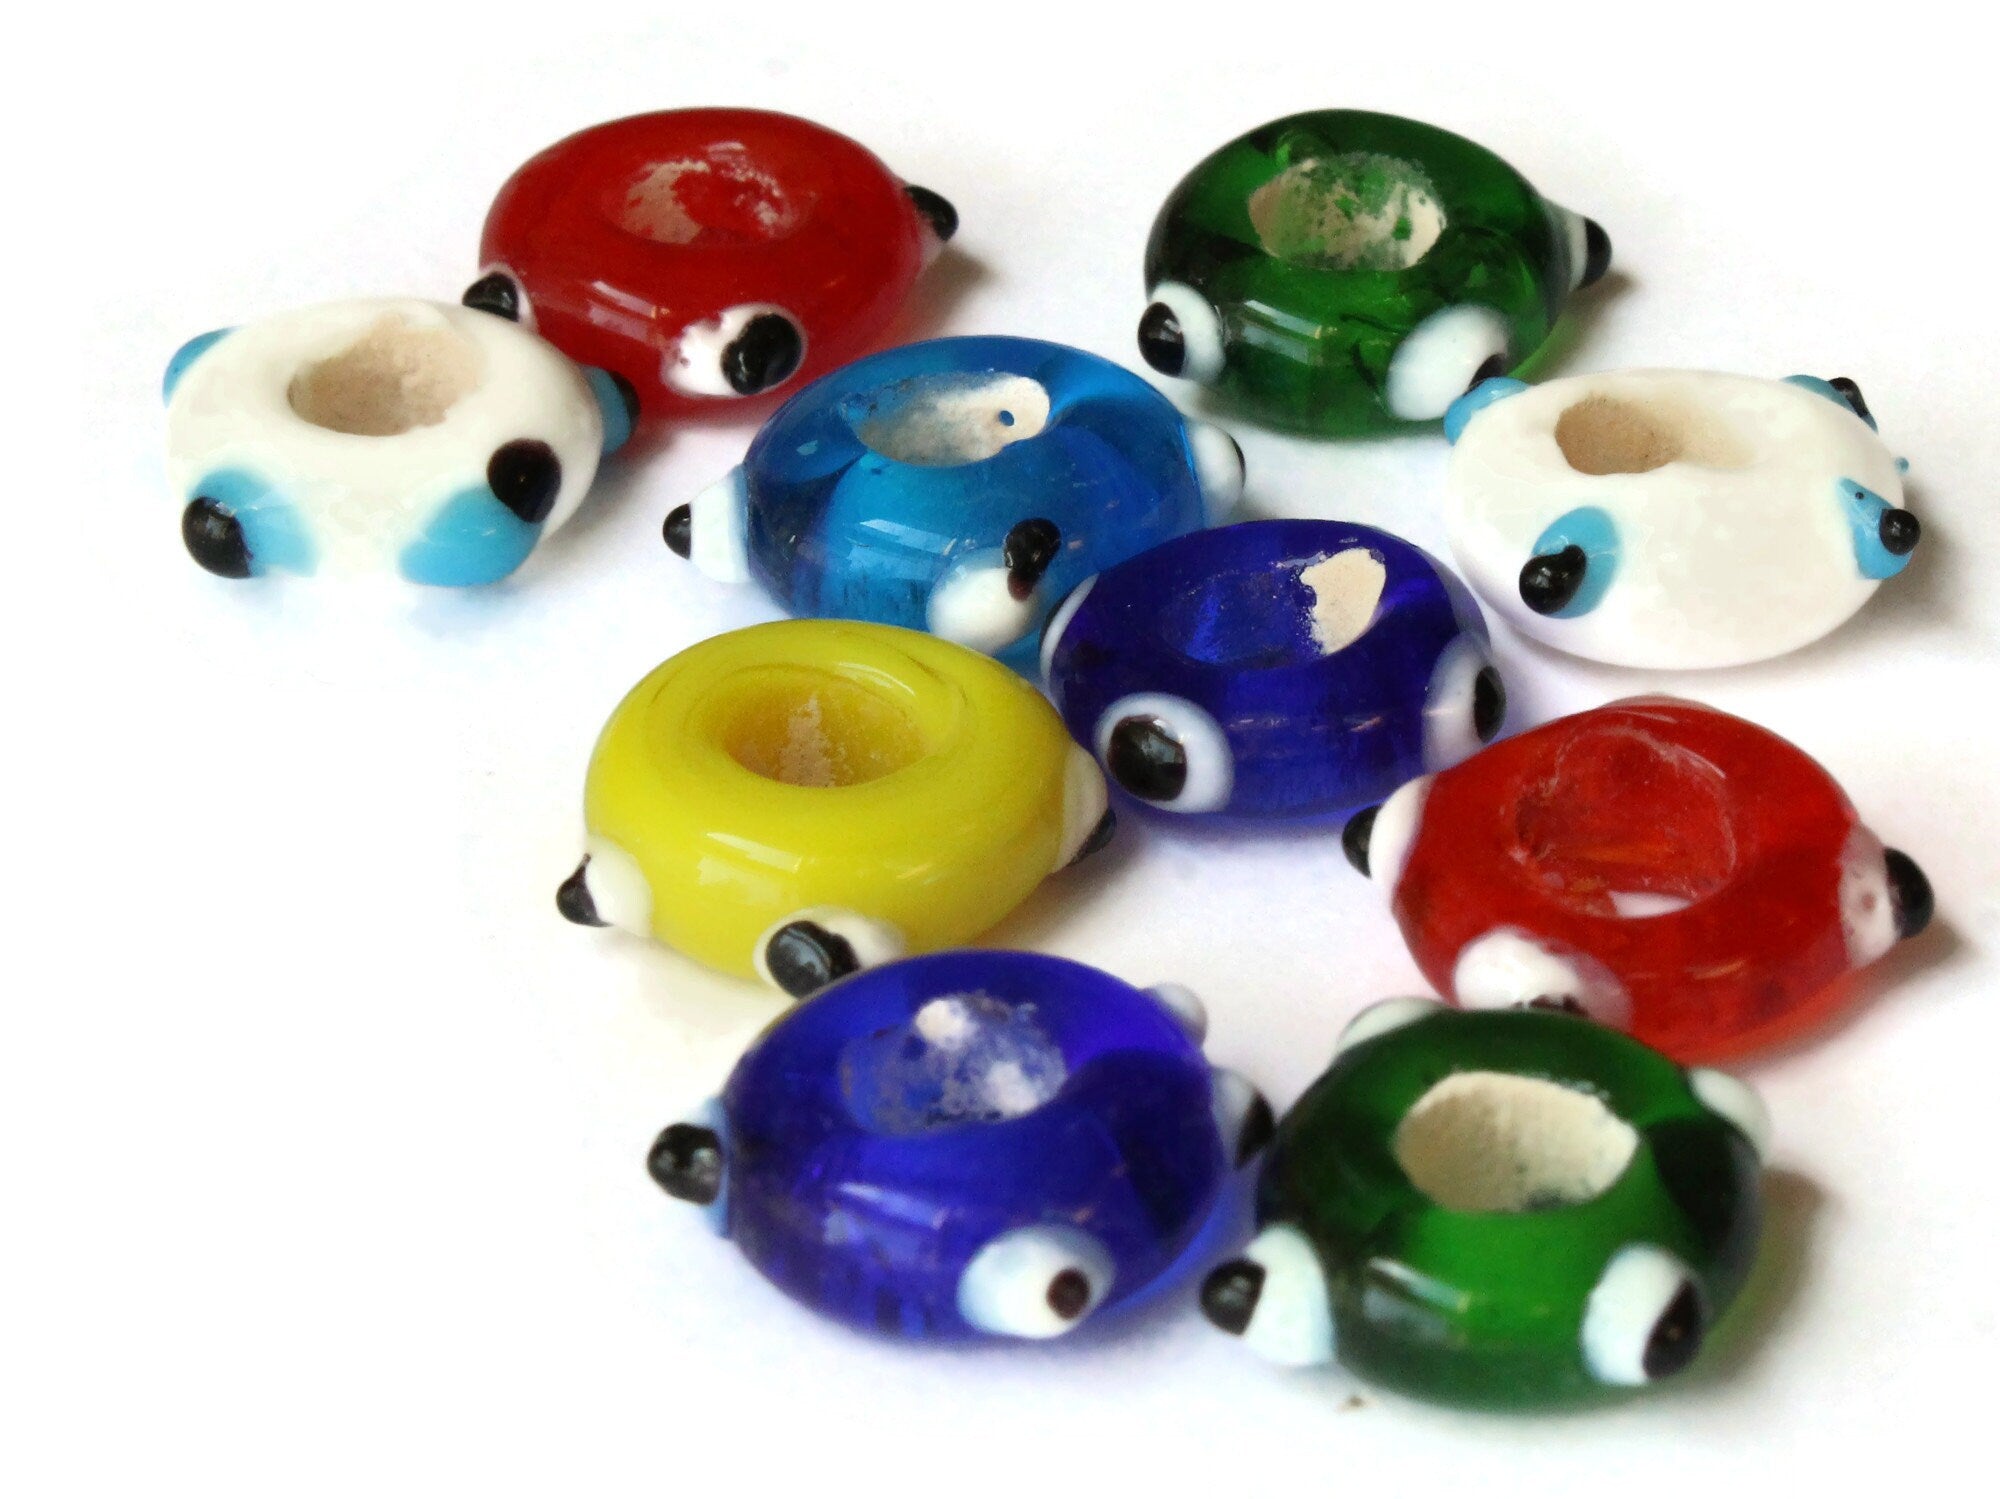 5mm Hole Round Glass Beads 10 Pack Large Hole Bead for Macrame